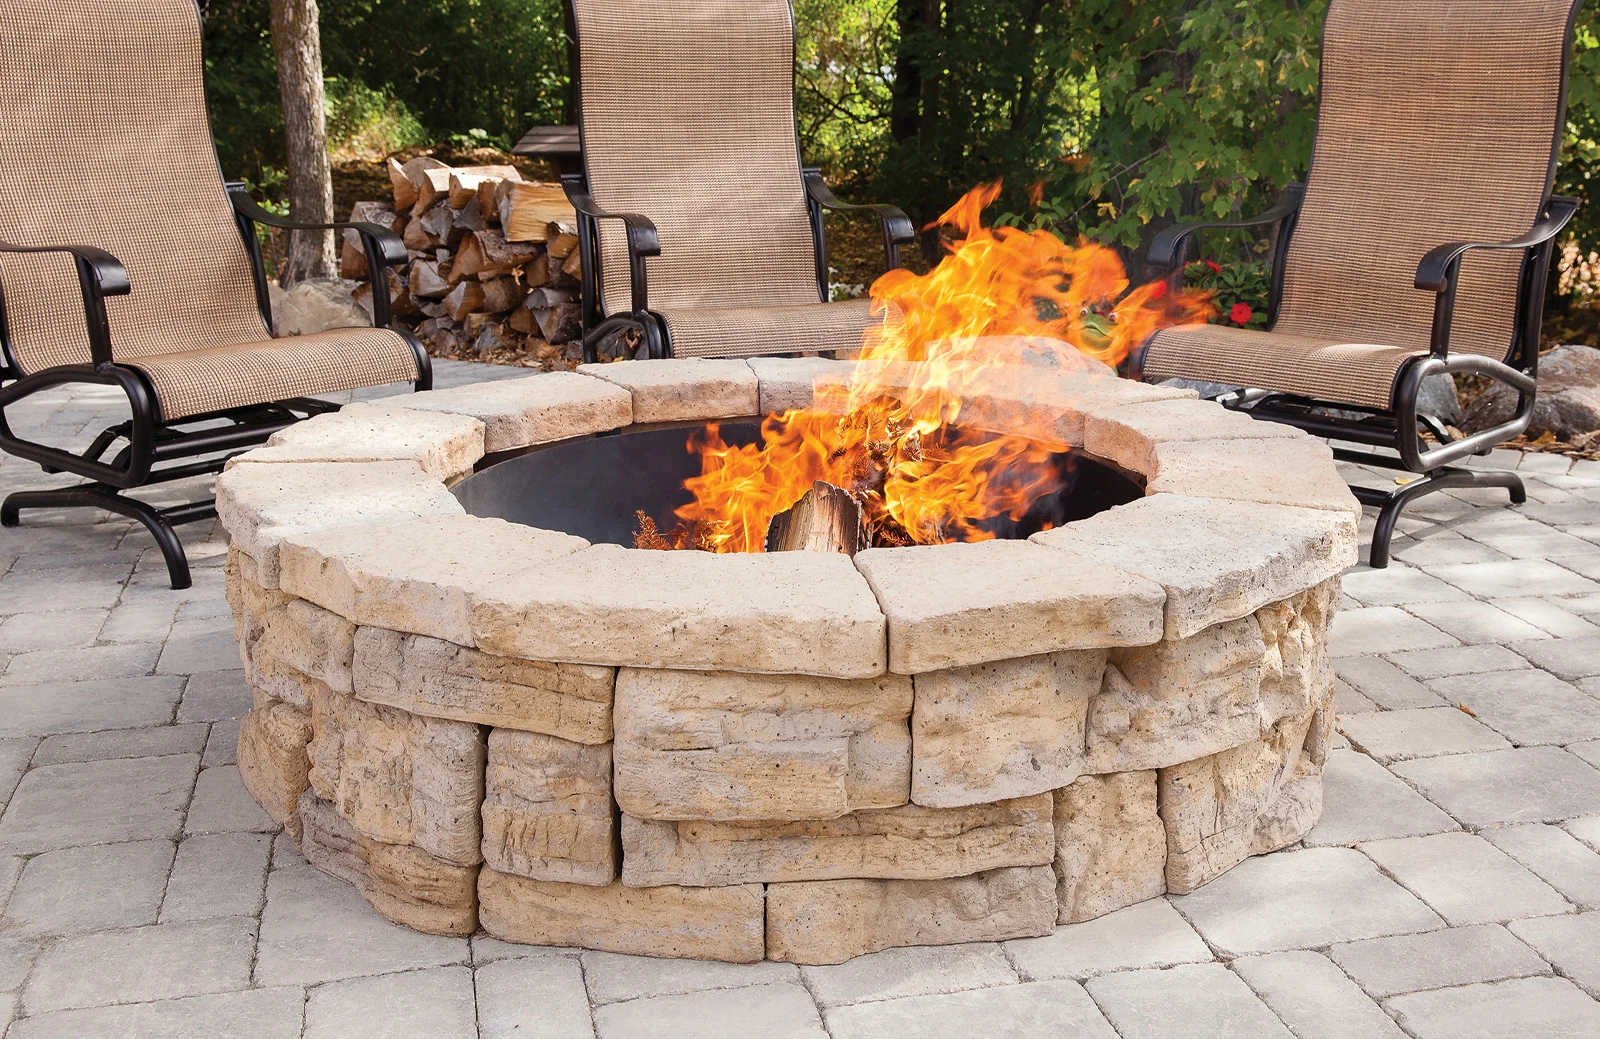 An above-ground fire pit